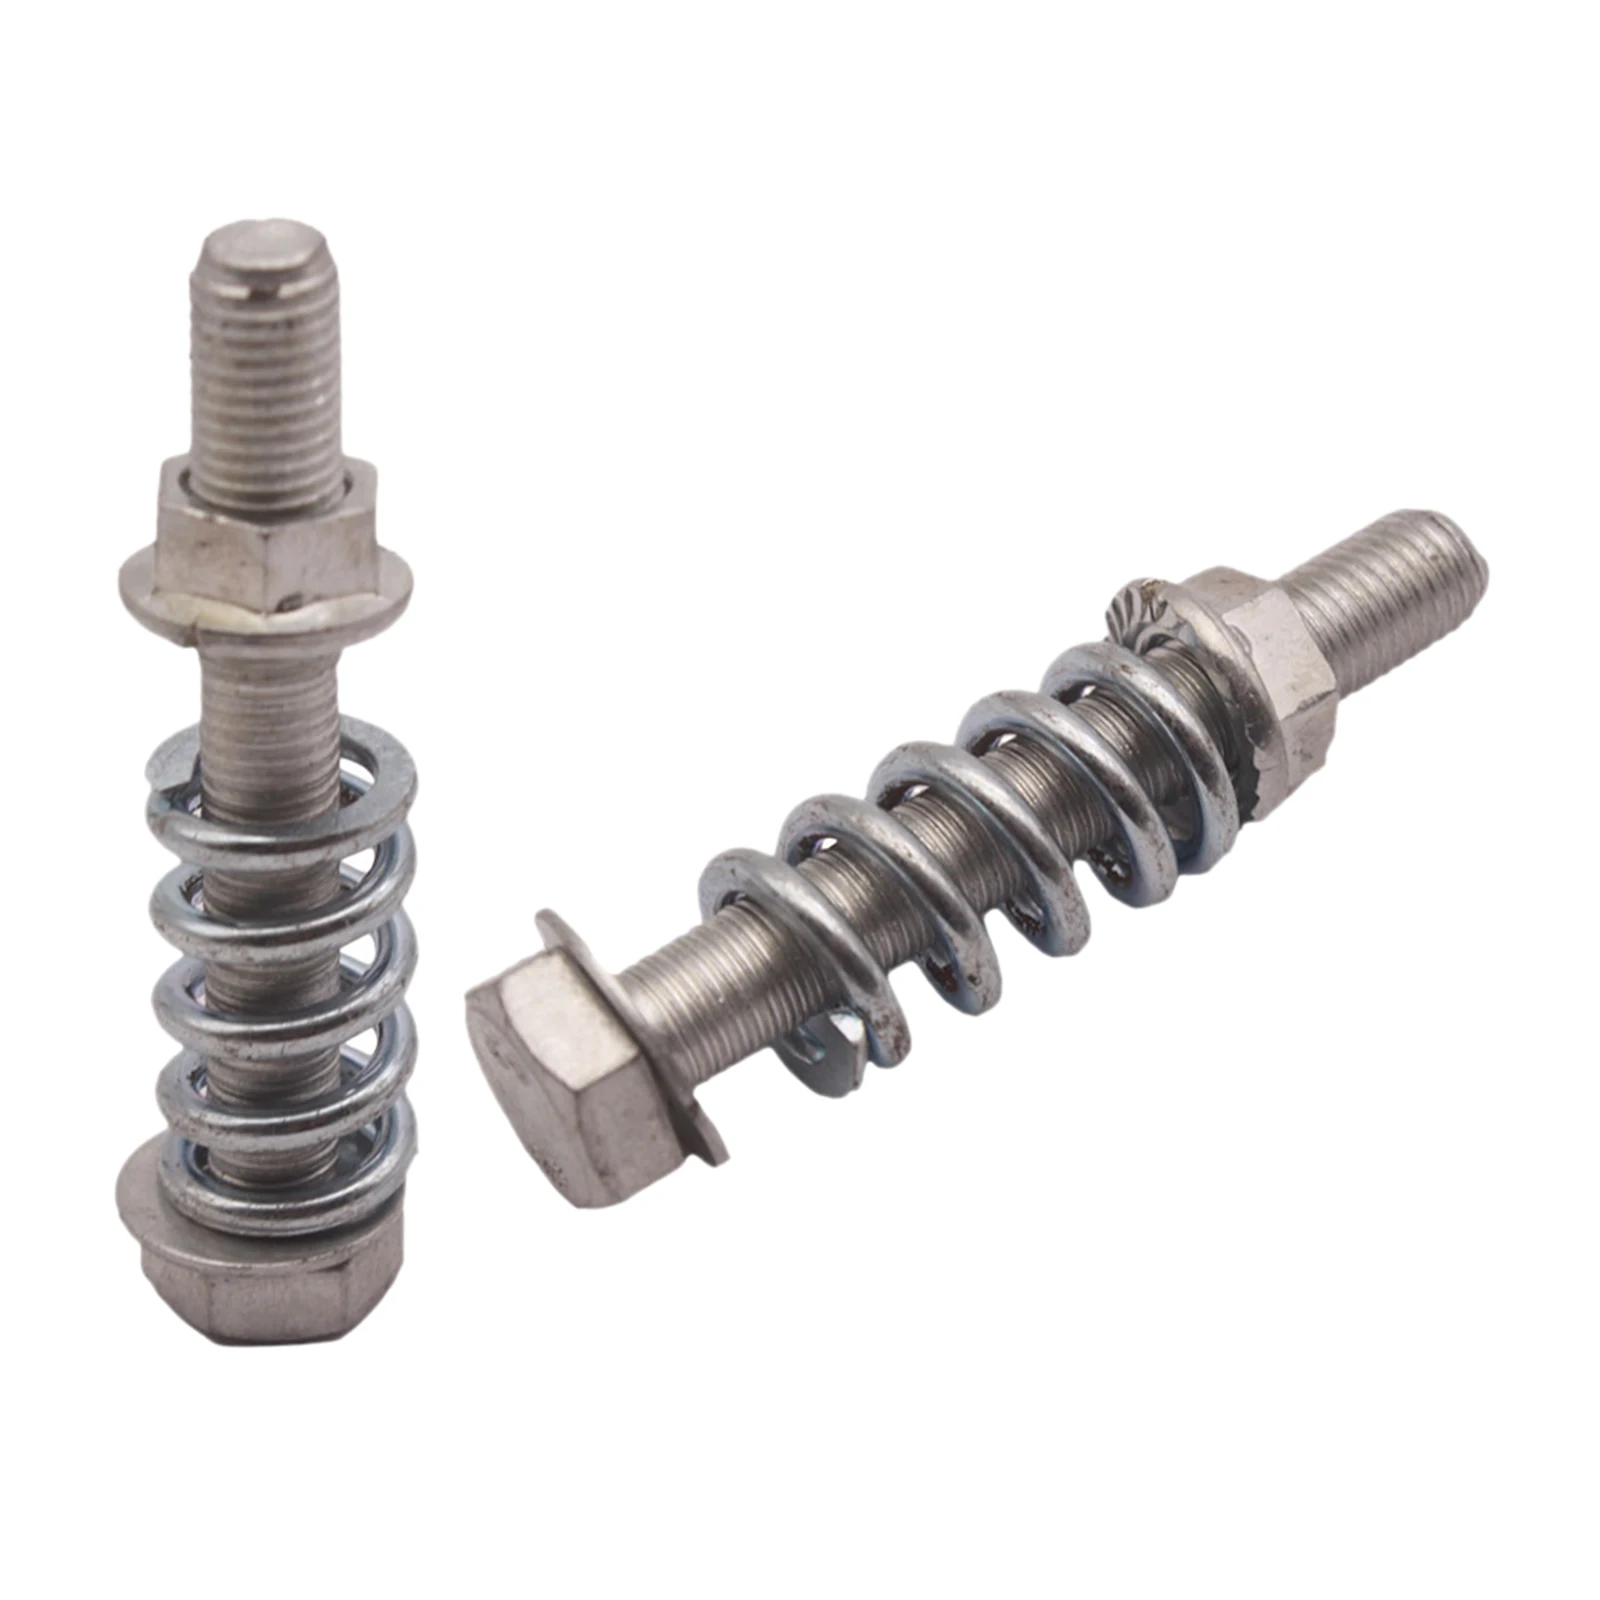 2x 1.5 Exhaust Bolt And Spring High quality pieces Professional